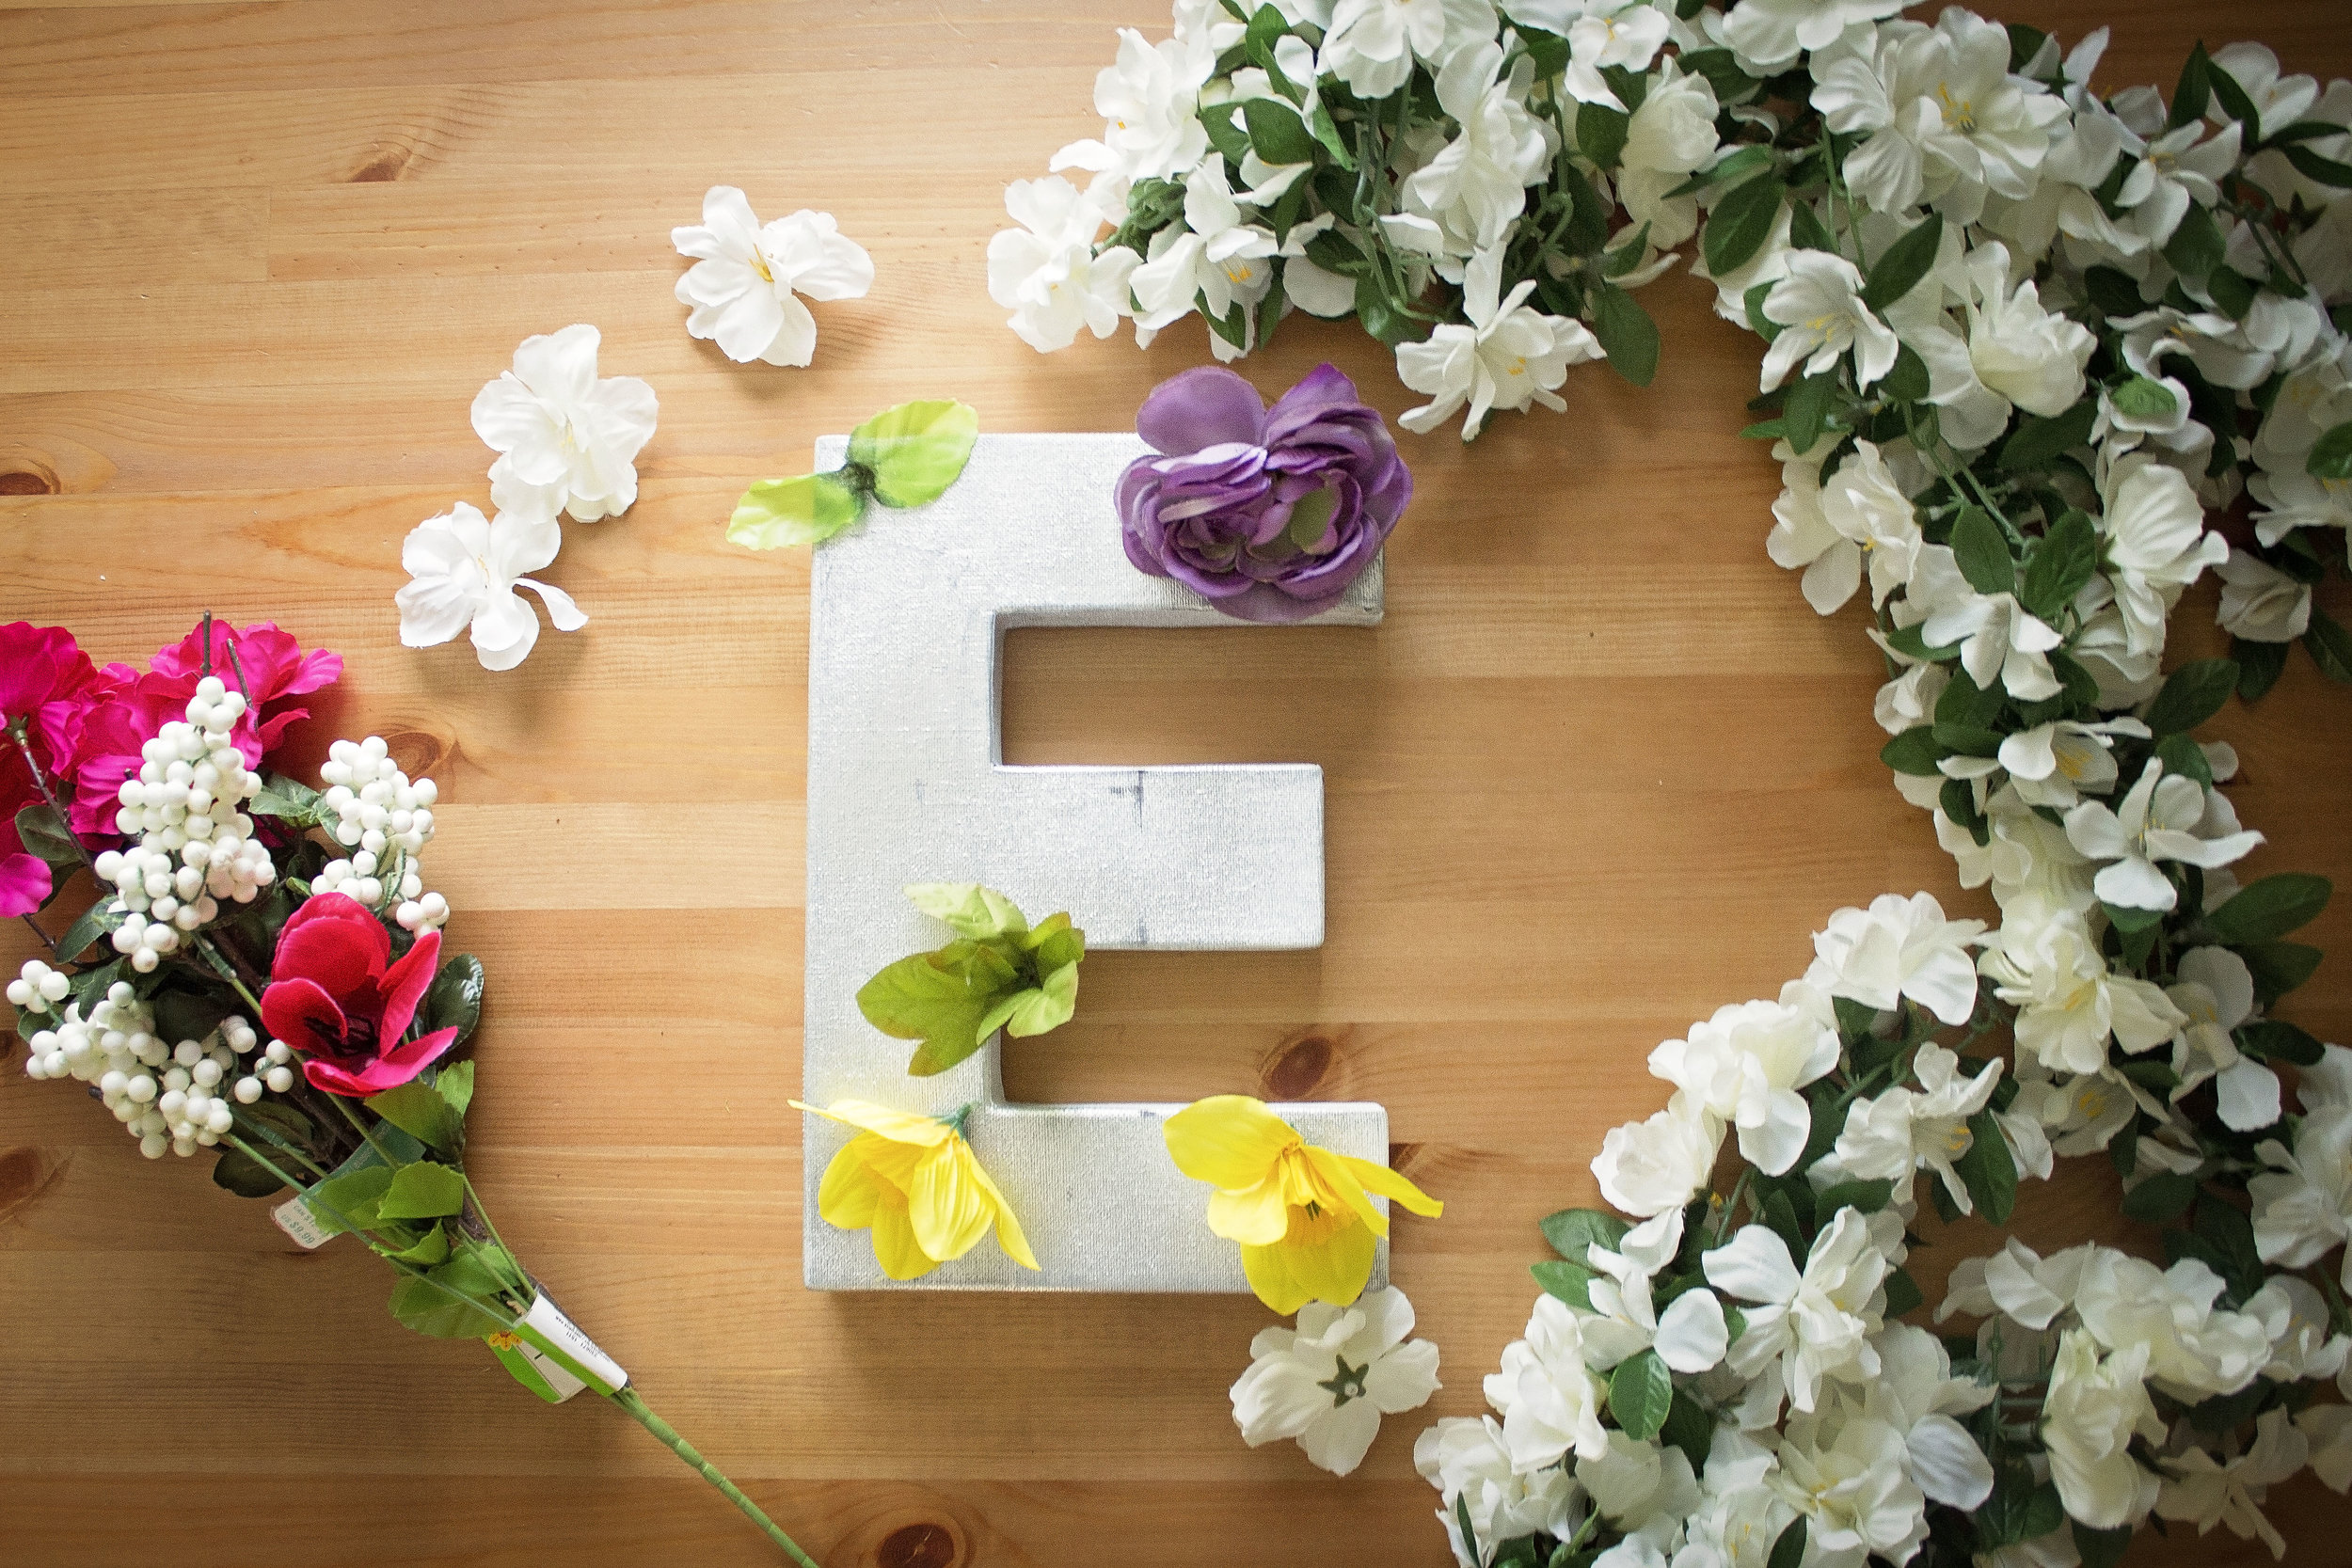 diy-d-i-y-floral-letters-photography-props-1st-birthday-ideas-crafts-michaels